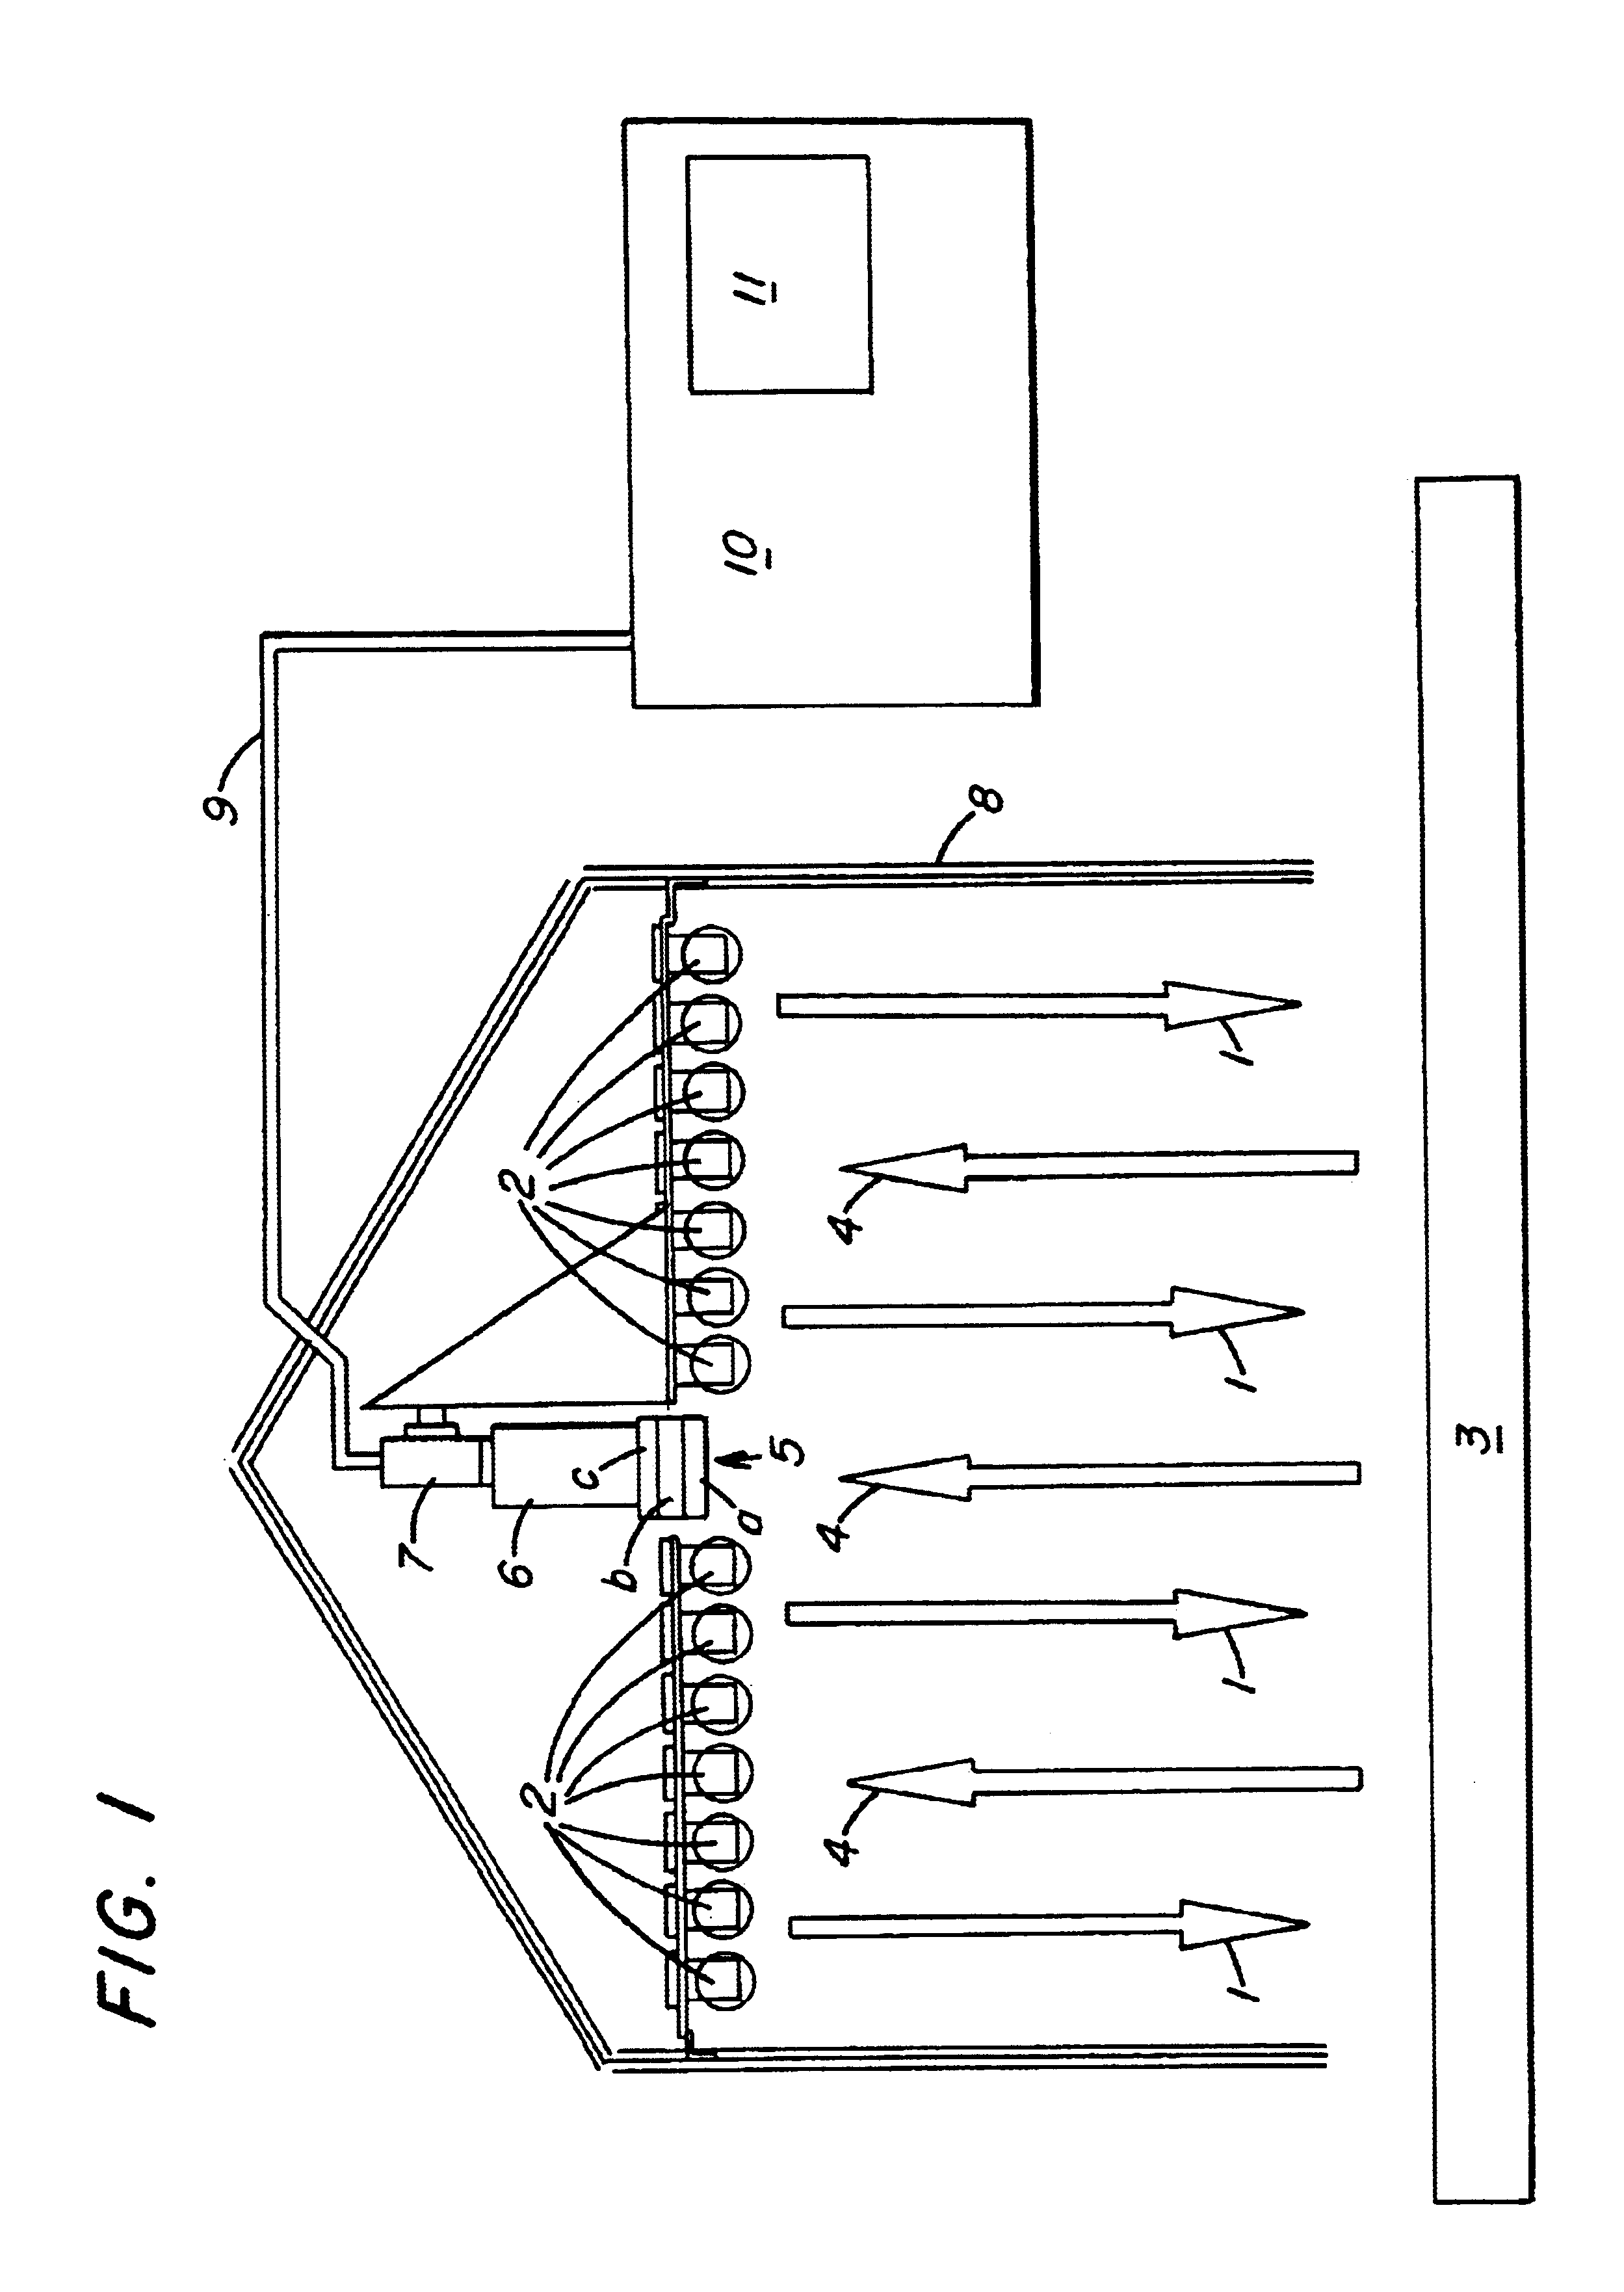 In-line process for monitoring binder dosage and distribution on a surface and apparatus useful therefor